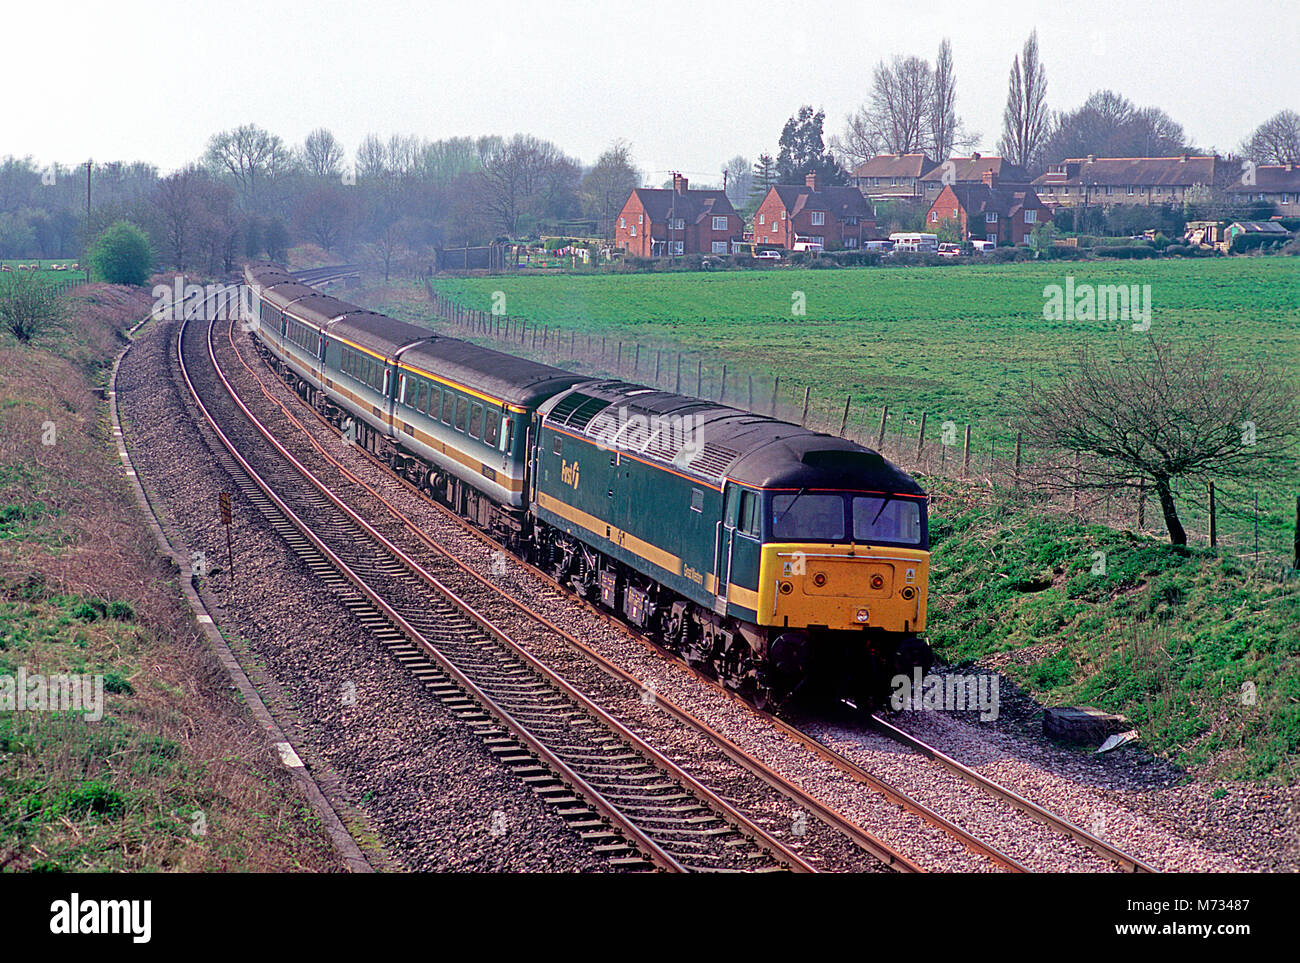 A class 47 diesel locomotive number 47811 working a First Great Western service at Aldermaston on the 30th March 2002. Stock Photo